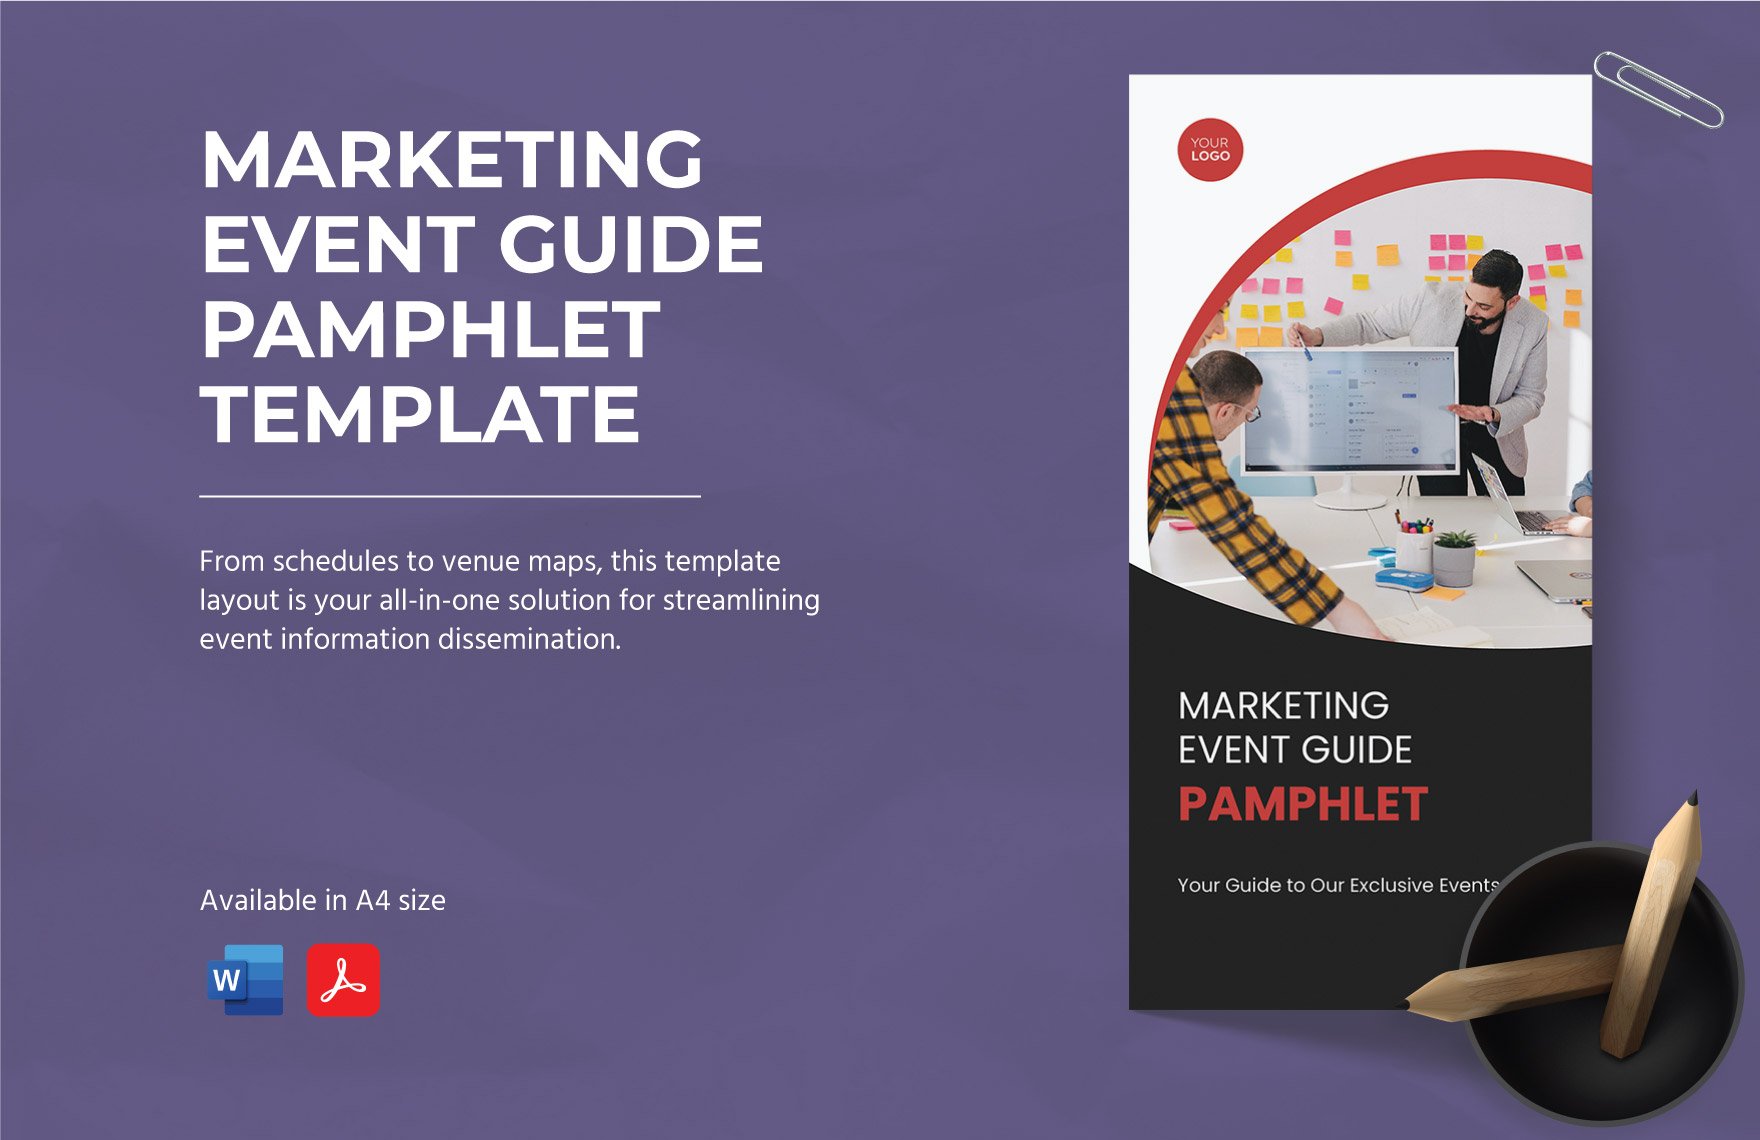 Marketing Event Guide Pamphlet Template